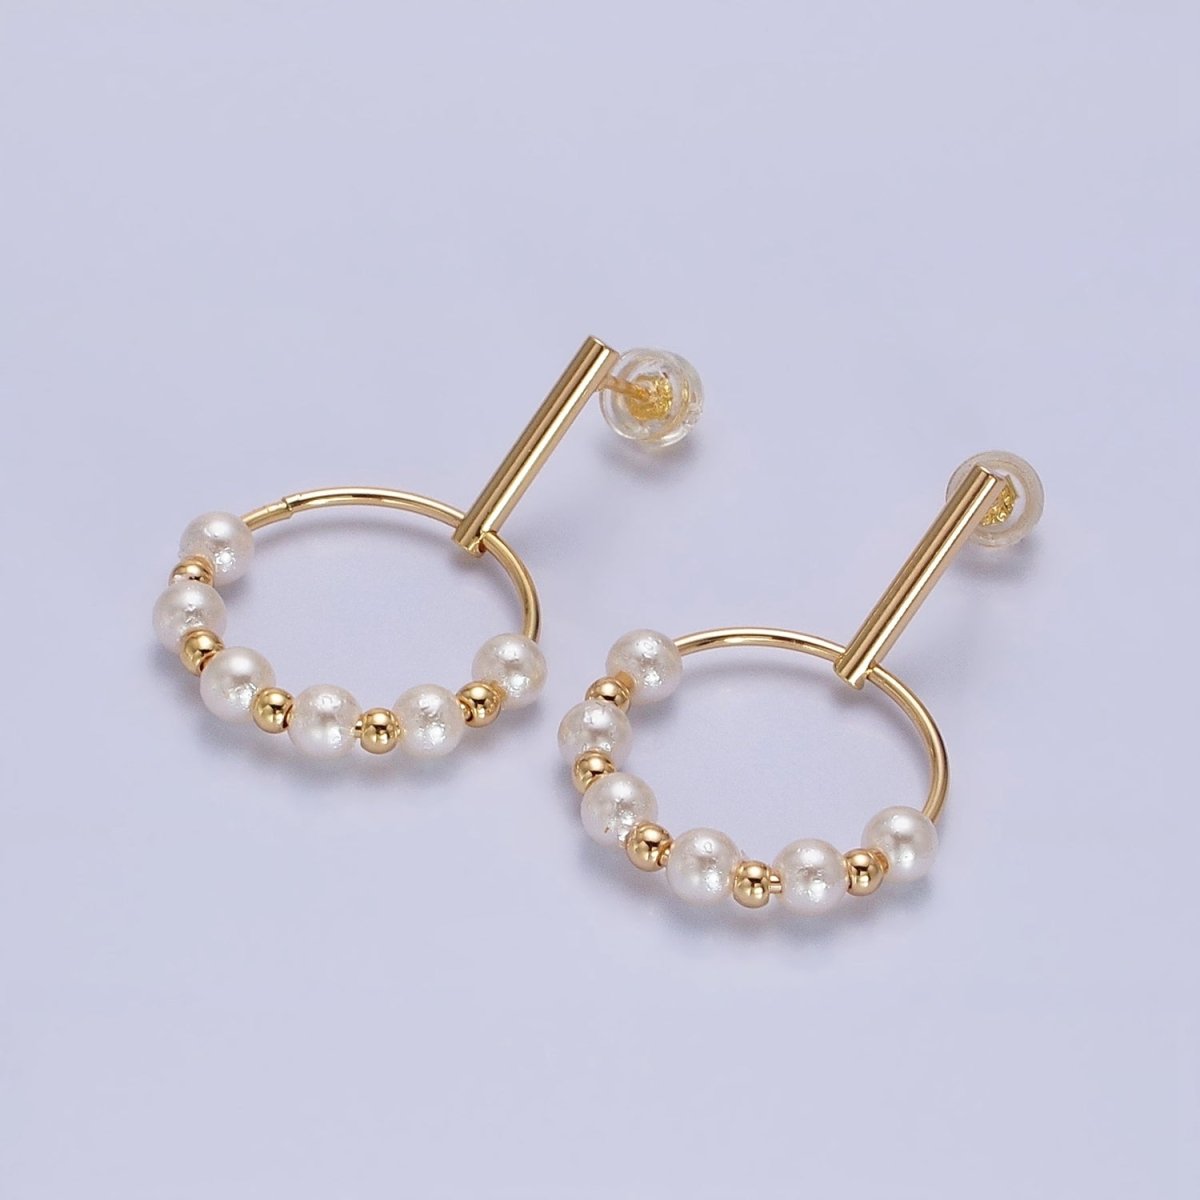 Silver, Gold Round White Pearl Bead Circular Drop Linear Stud Earrings | AB1098 AD784 - DLUXCA